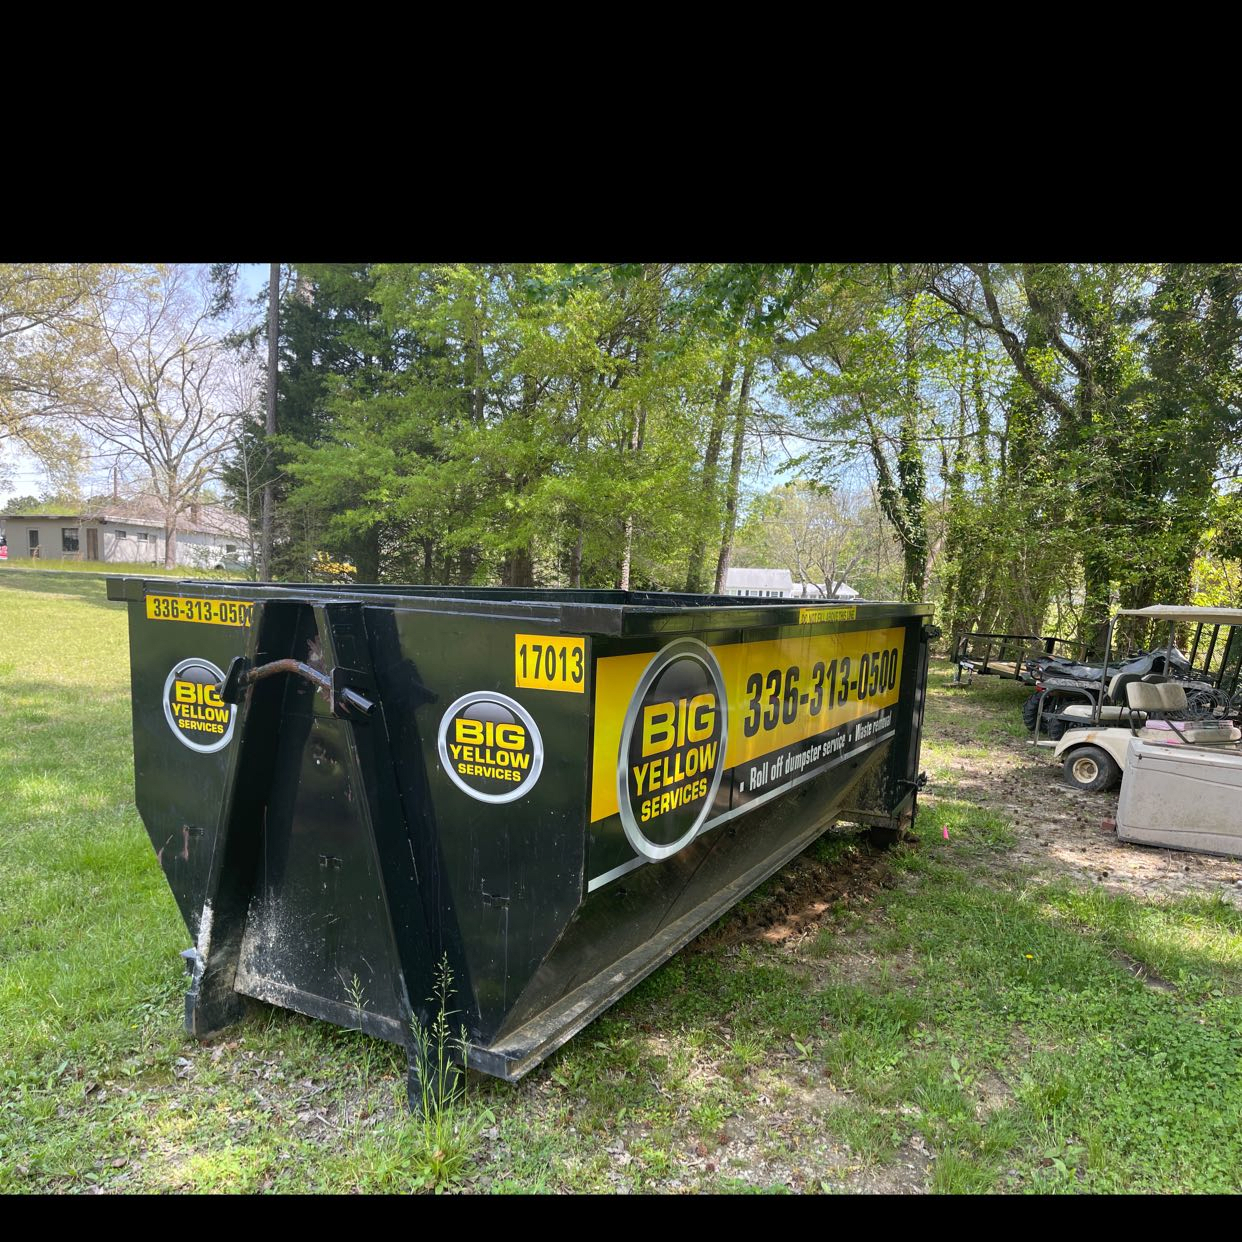 1820 Gerringer Road Elon, NC 27244 Dumpster Rental Terms of Use | Roll-Off Dumpster and Portable Toilet Rentals | Big Yellow Services, LLC